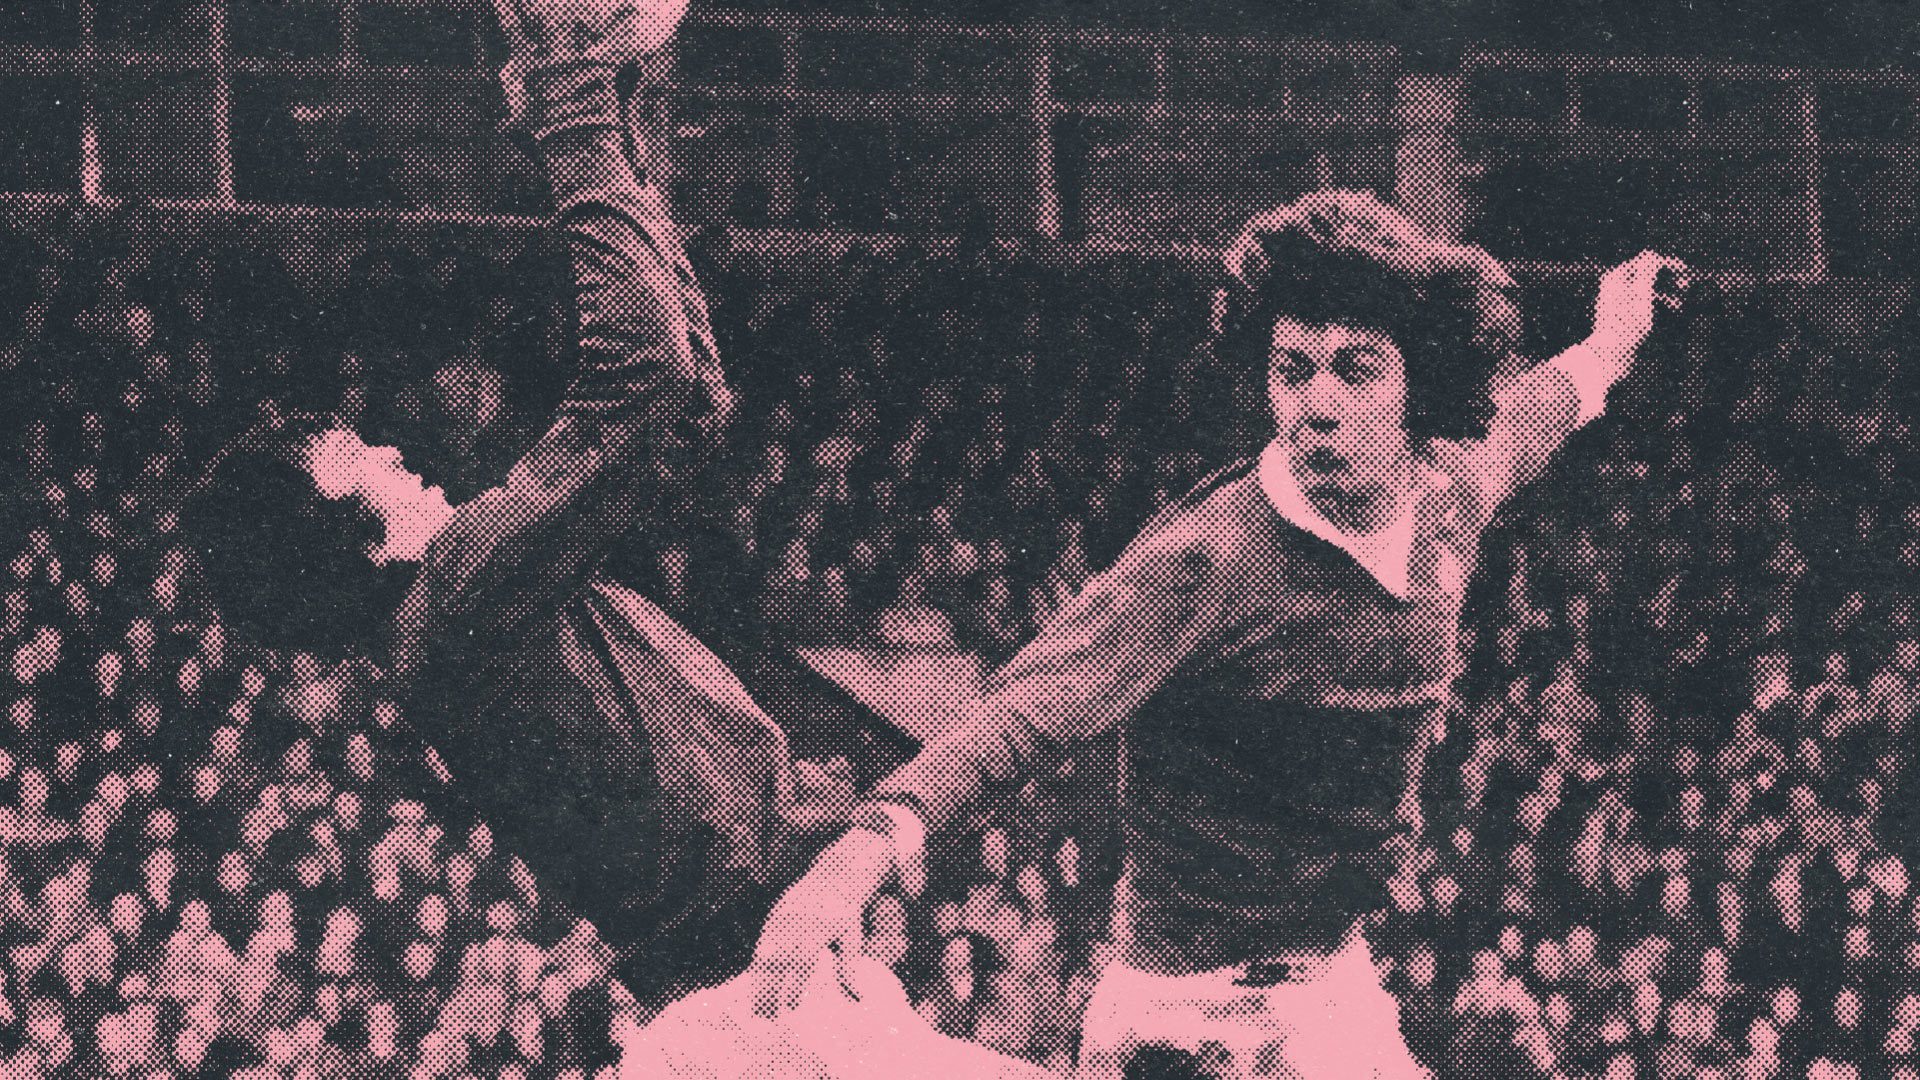 David Harvey making a save for Leeds United away from the threat of Gordon McQueen's swinging fists